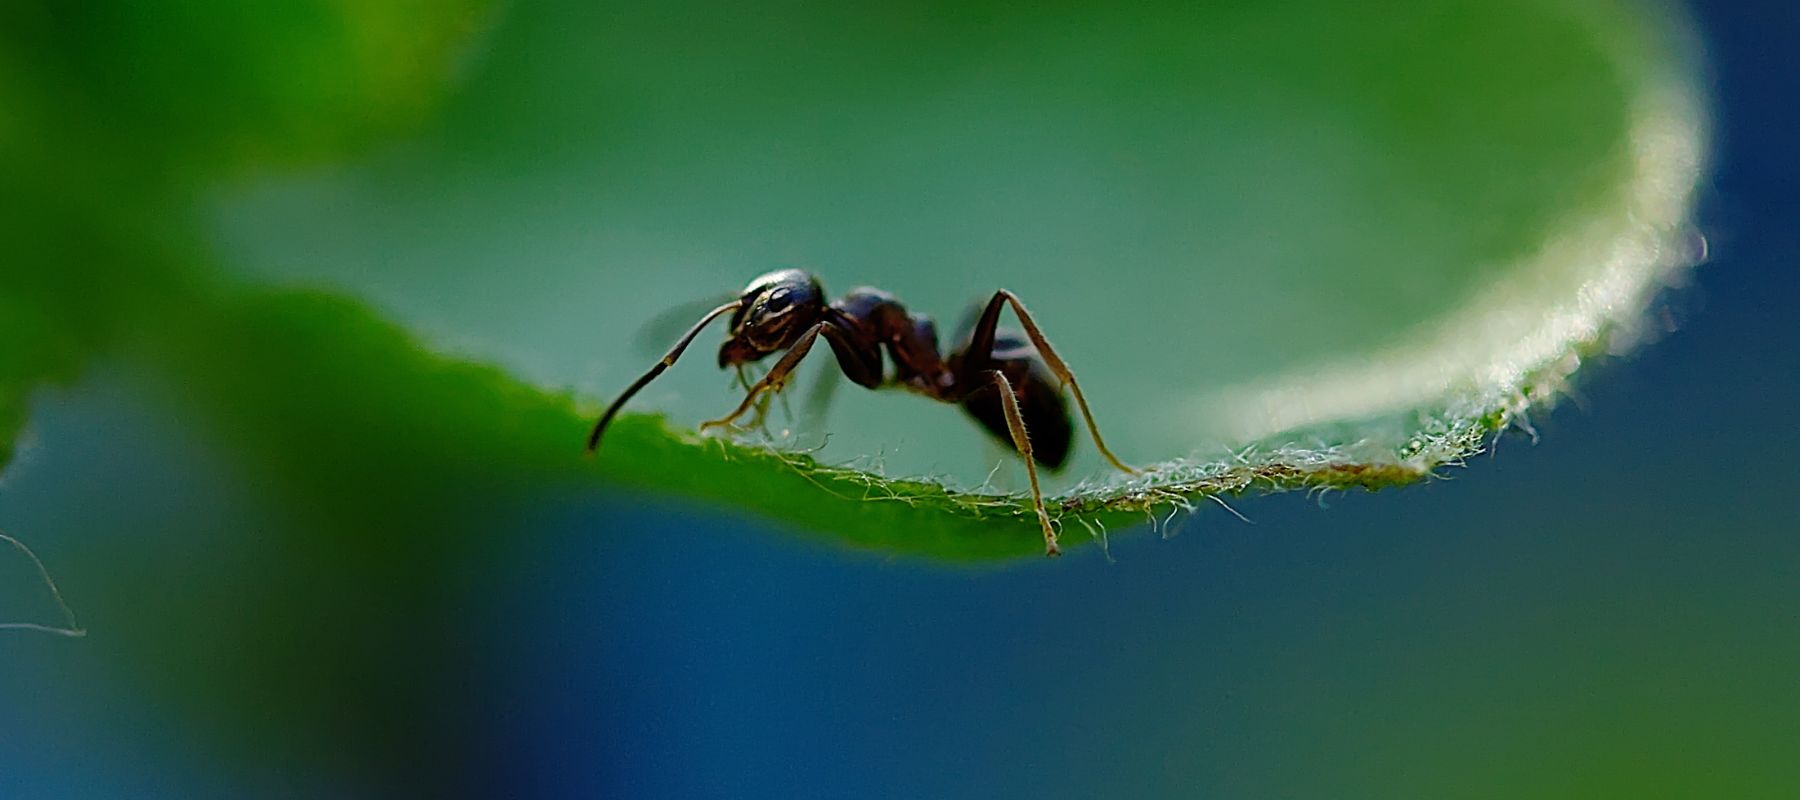 Got ants in your plants?